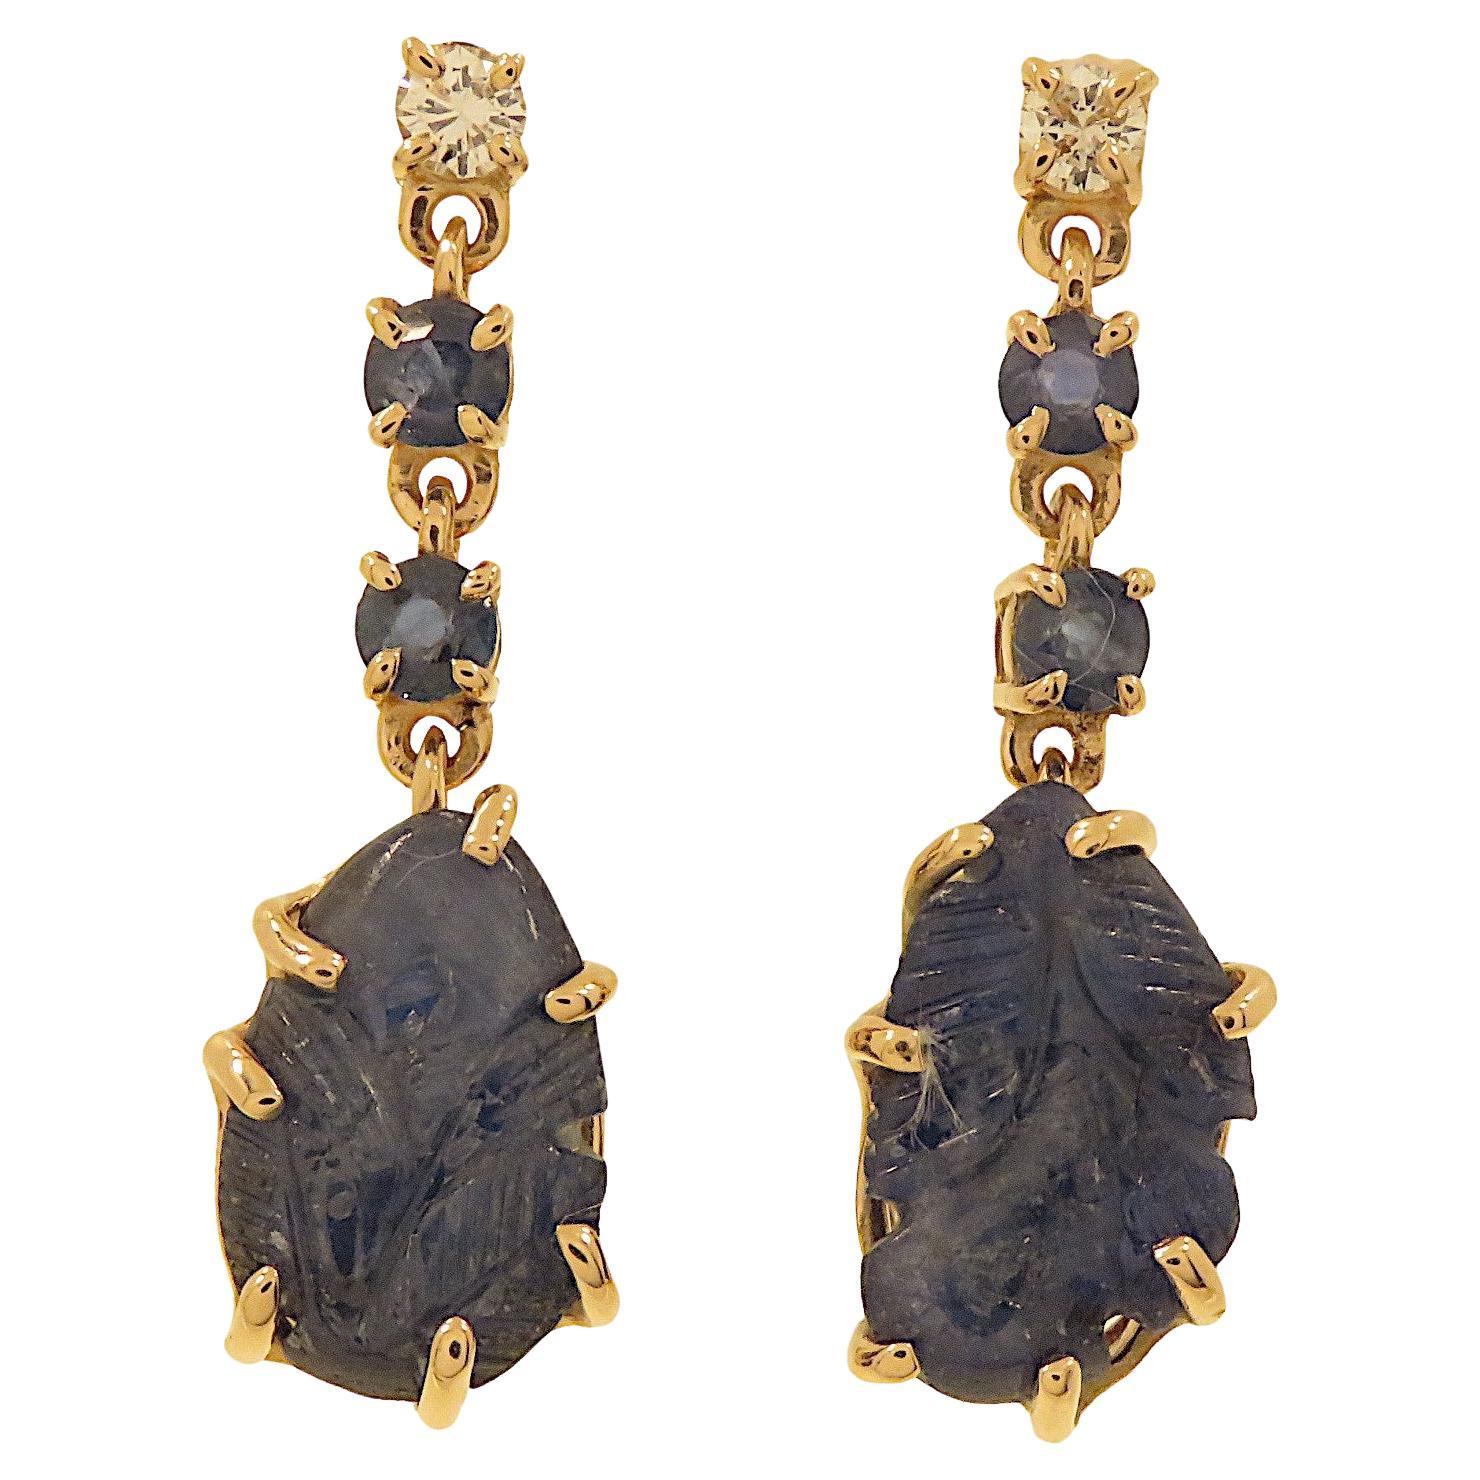 Botta jewelry earrings with diamonds and blue sapphires in rose gold